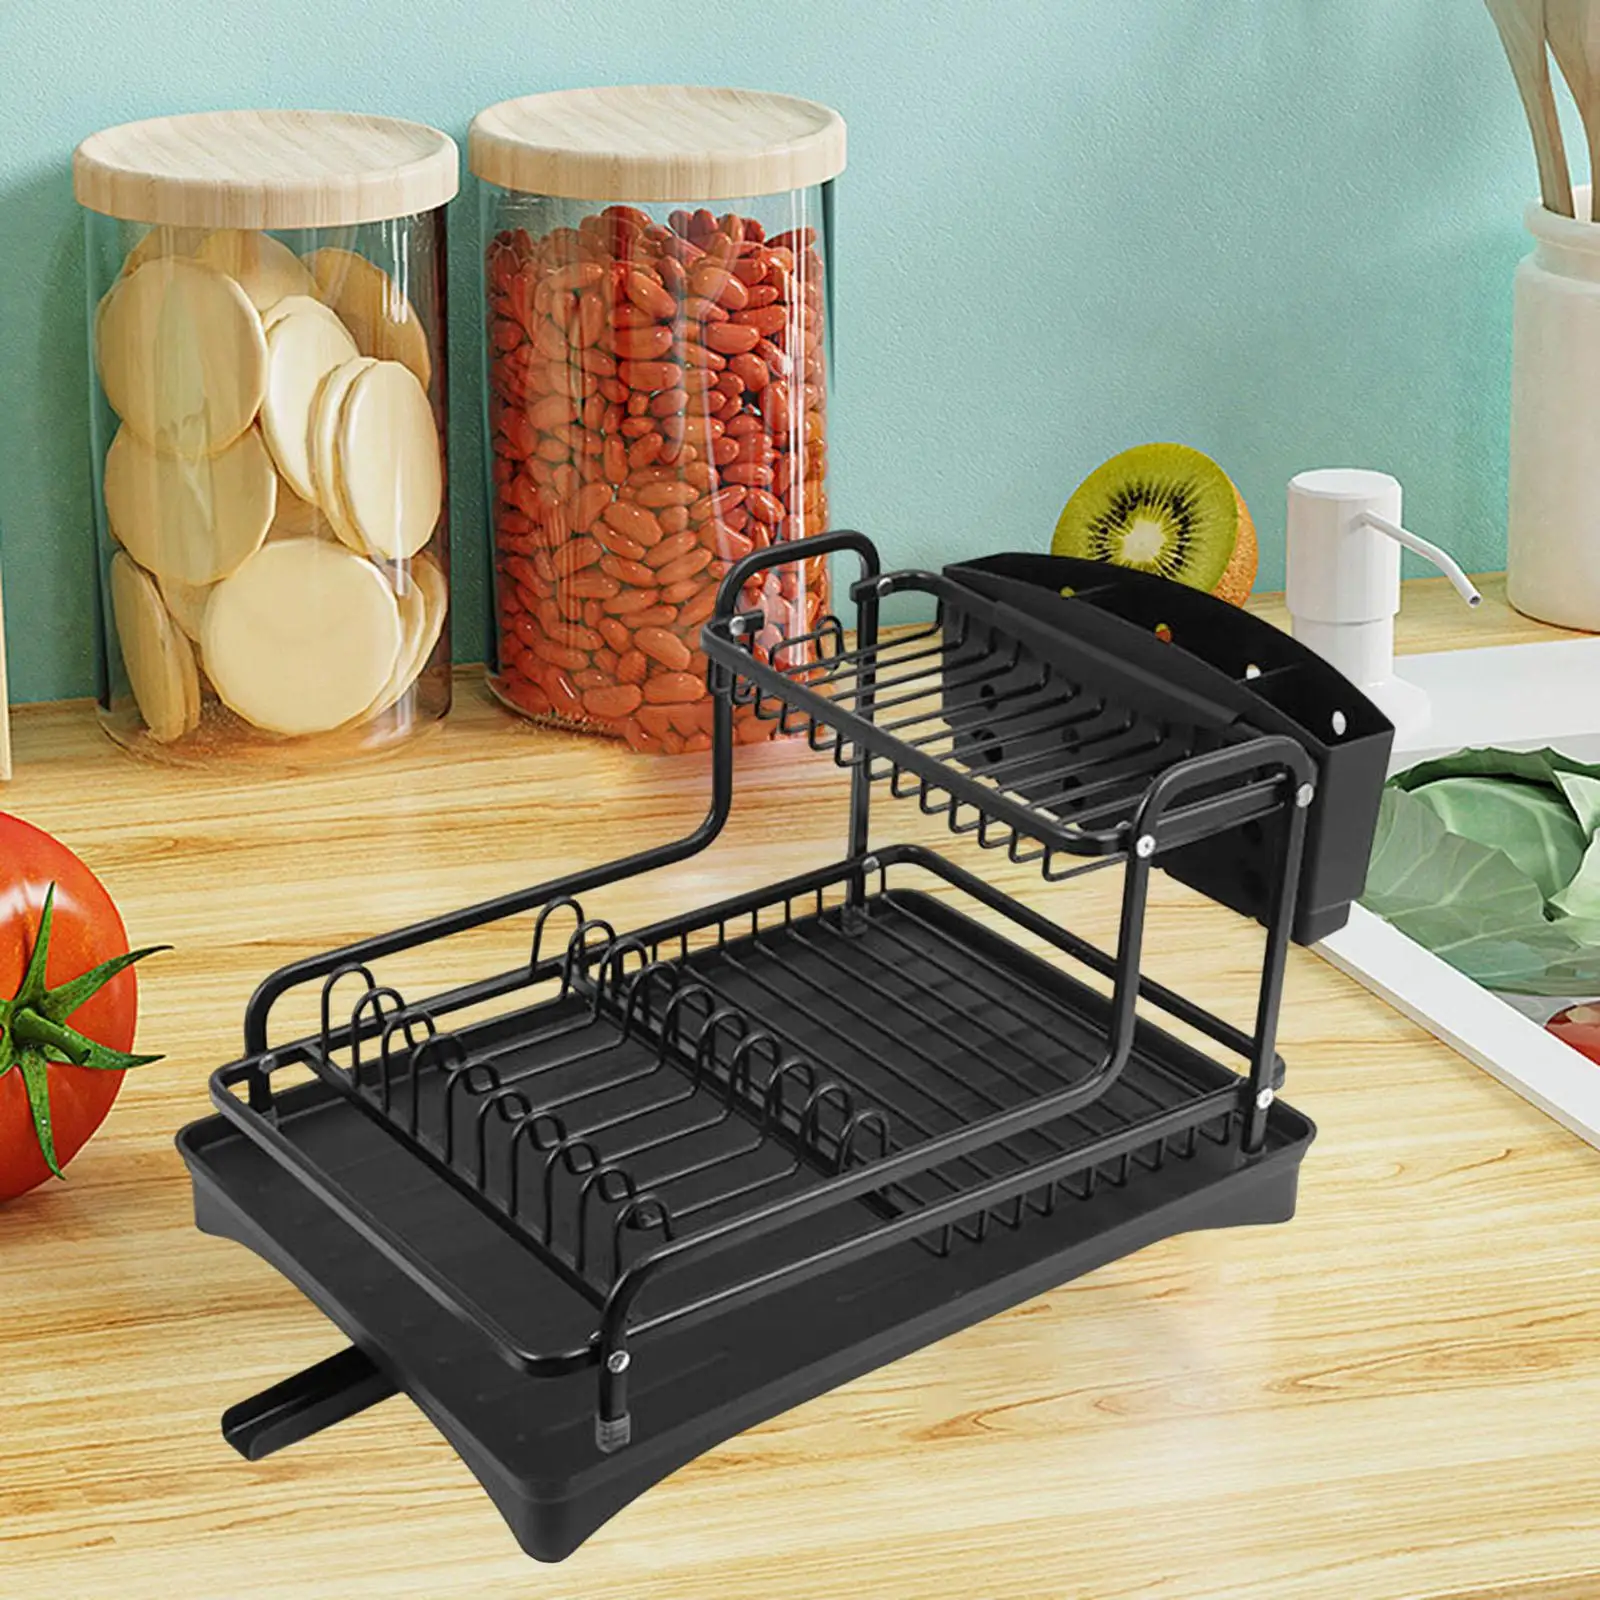 Dish Drying Rack Cleaning Brush Holder Kitchen Organizer for Countertop